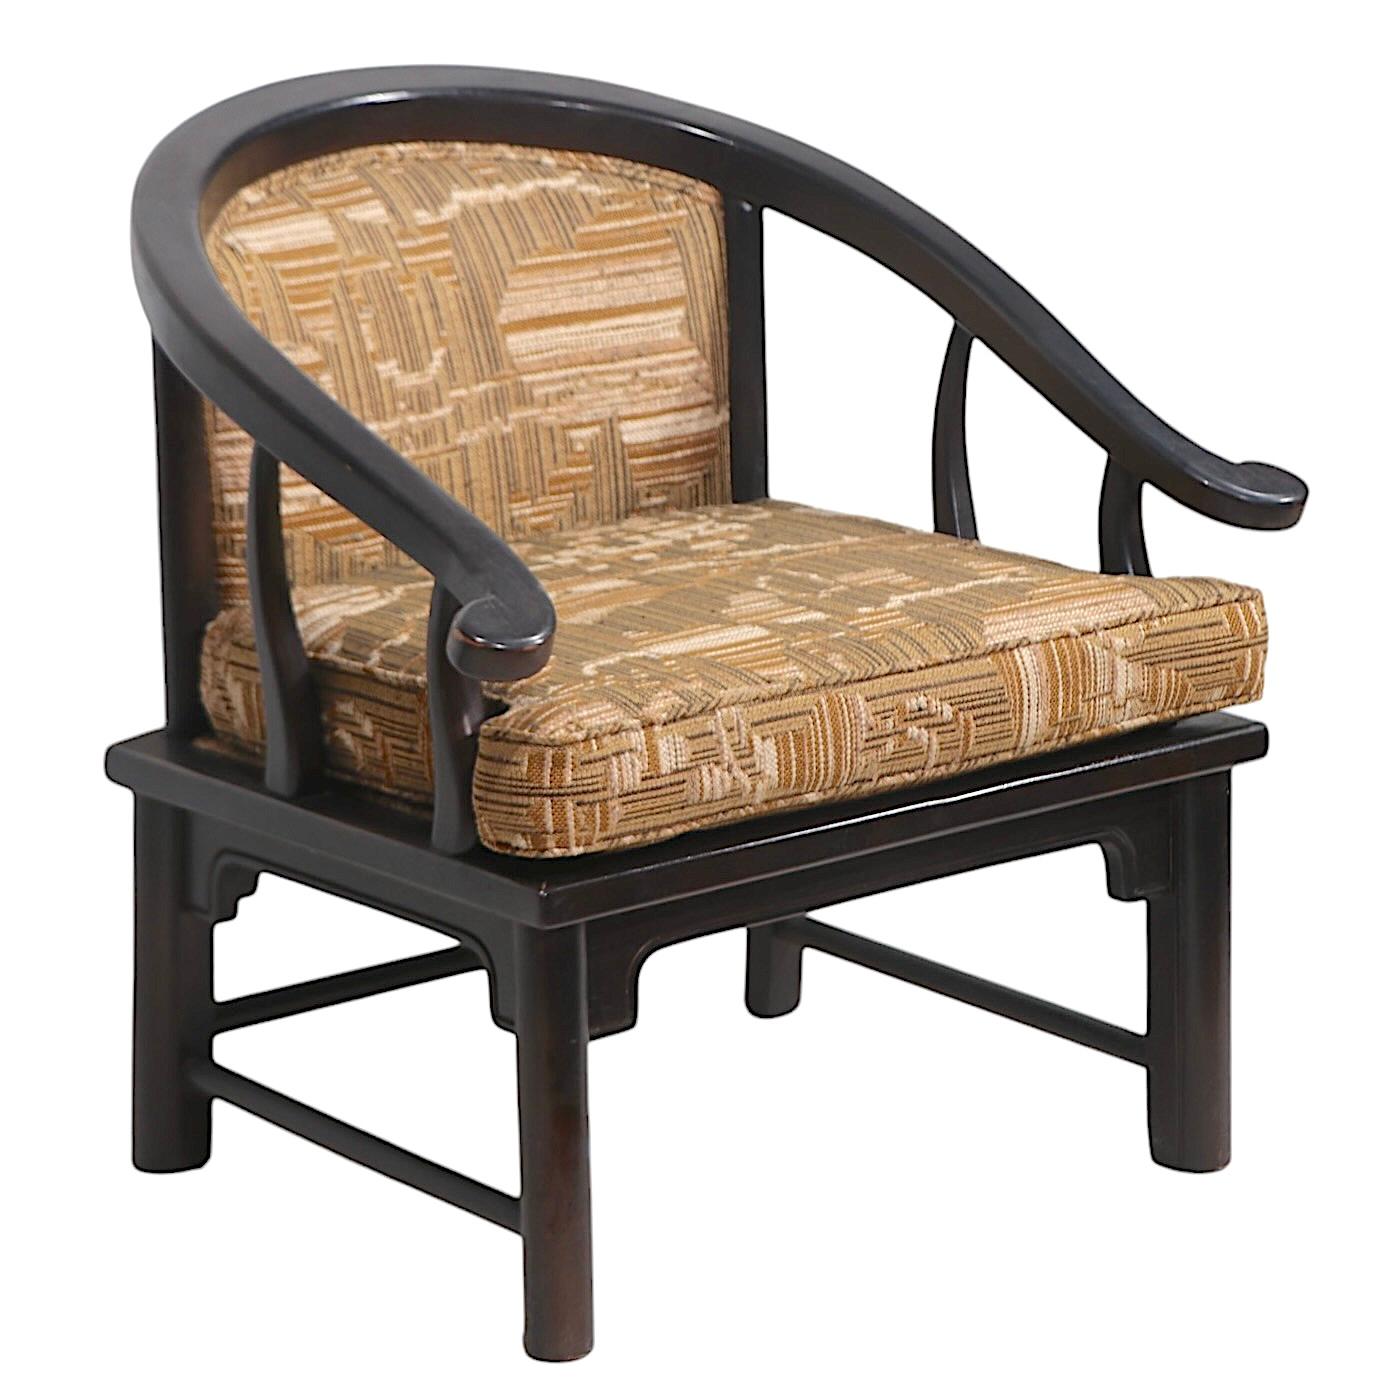 Voguish, chic, and sophisticated horseshoe style, Chinese influence lounge chair, attributed to the  Century Furniture Co. in the style of  James Mont. The chair features a solid oak frame, in original dark brown finish, with exceptional original